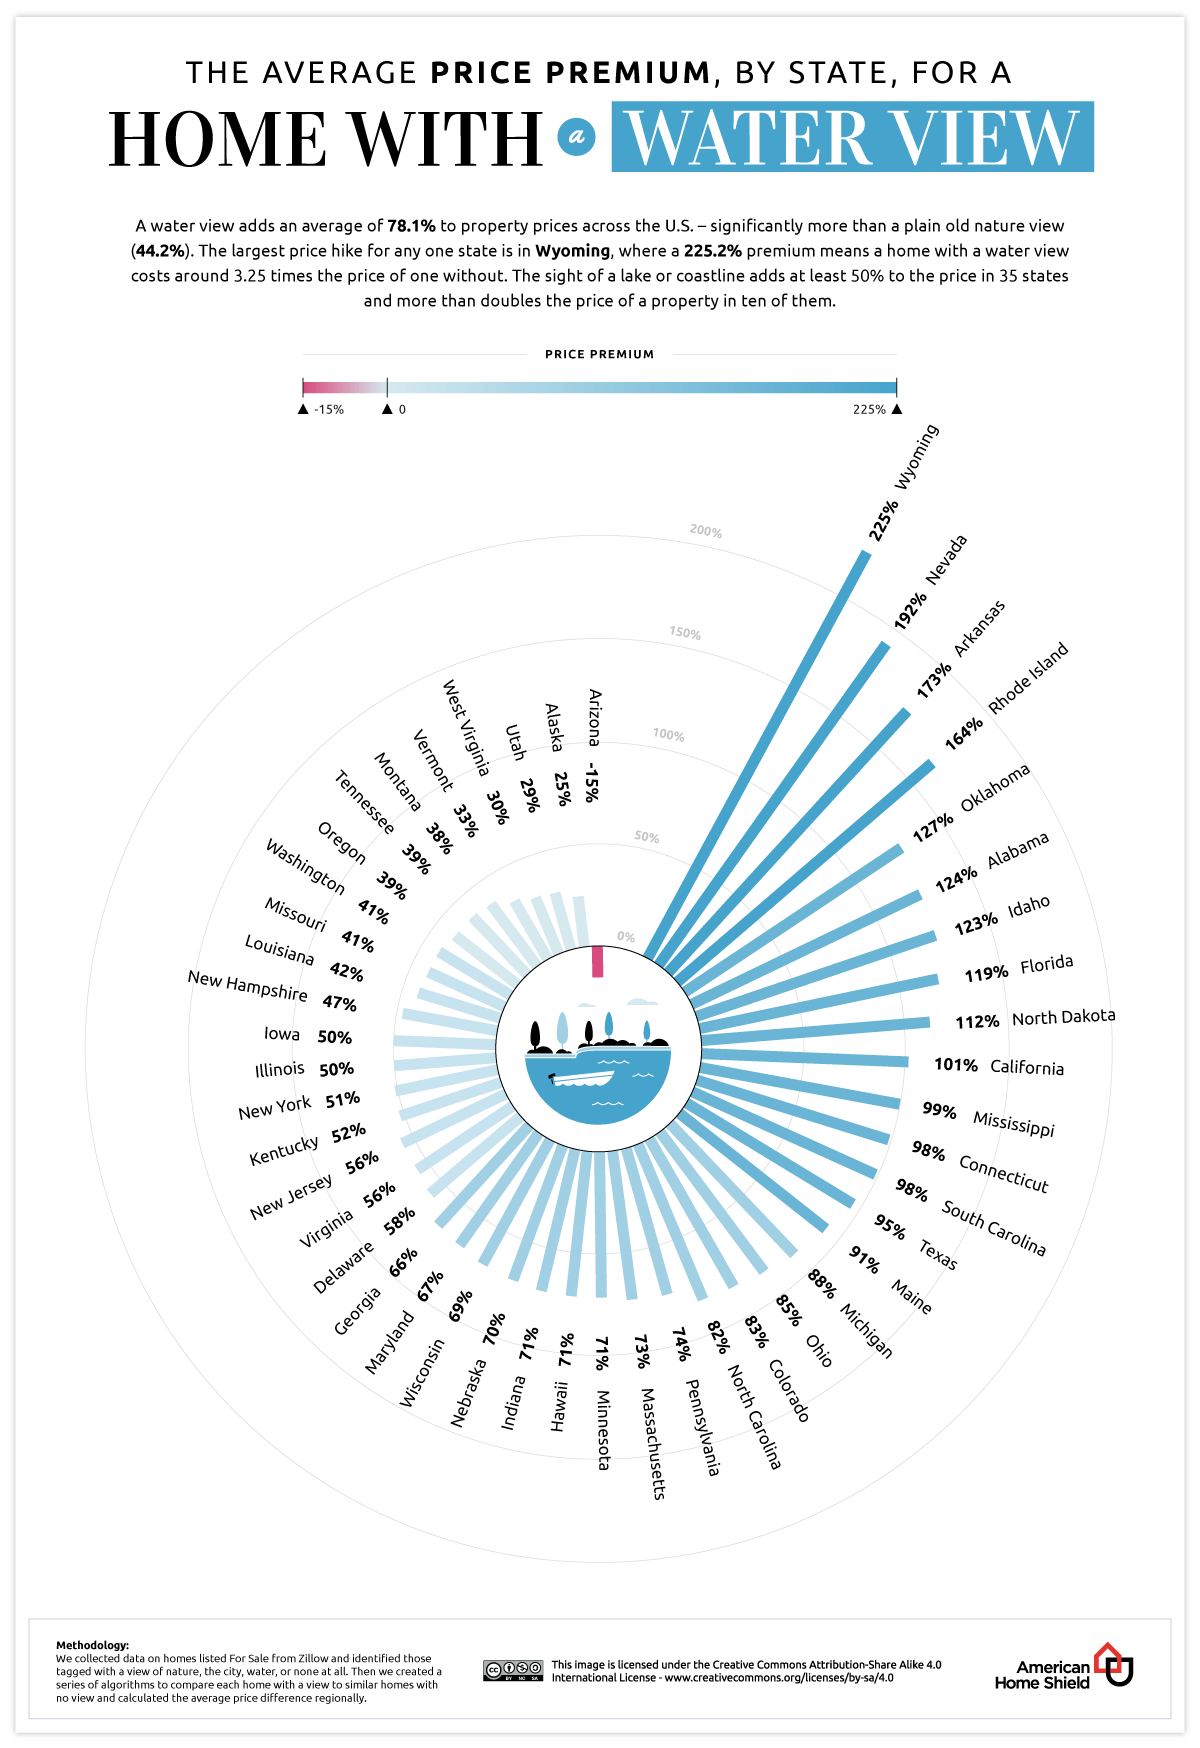 average price premium by state for a home with a water view